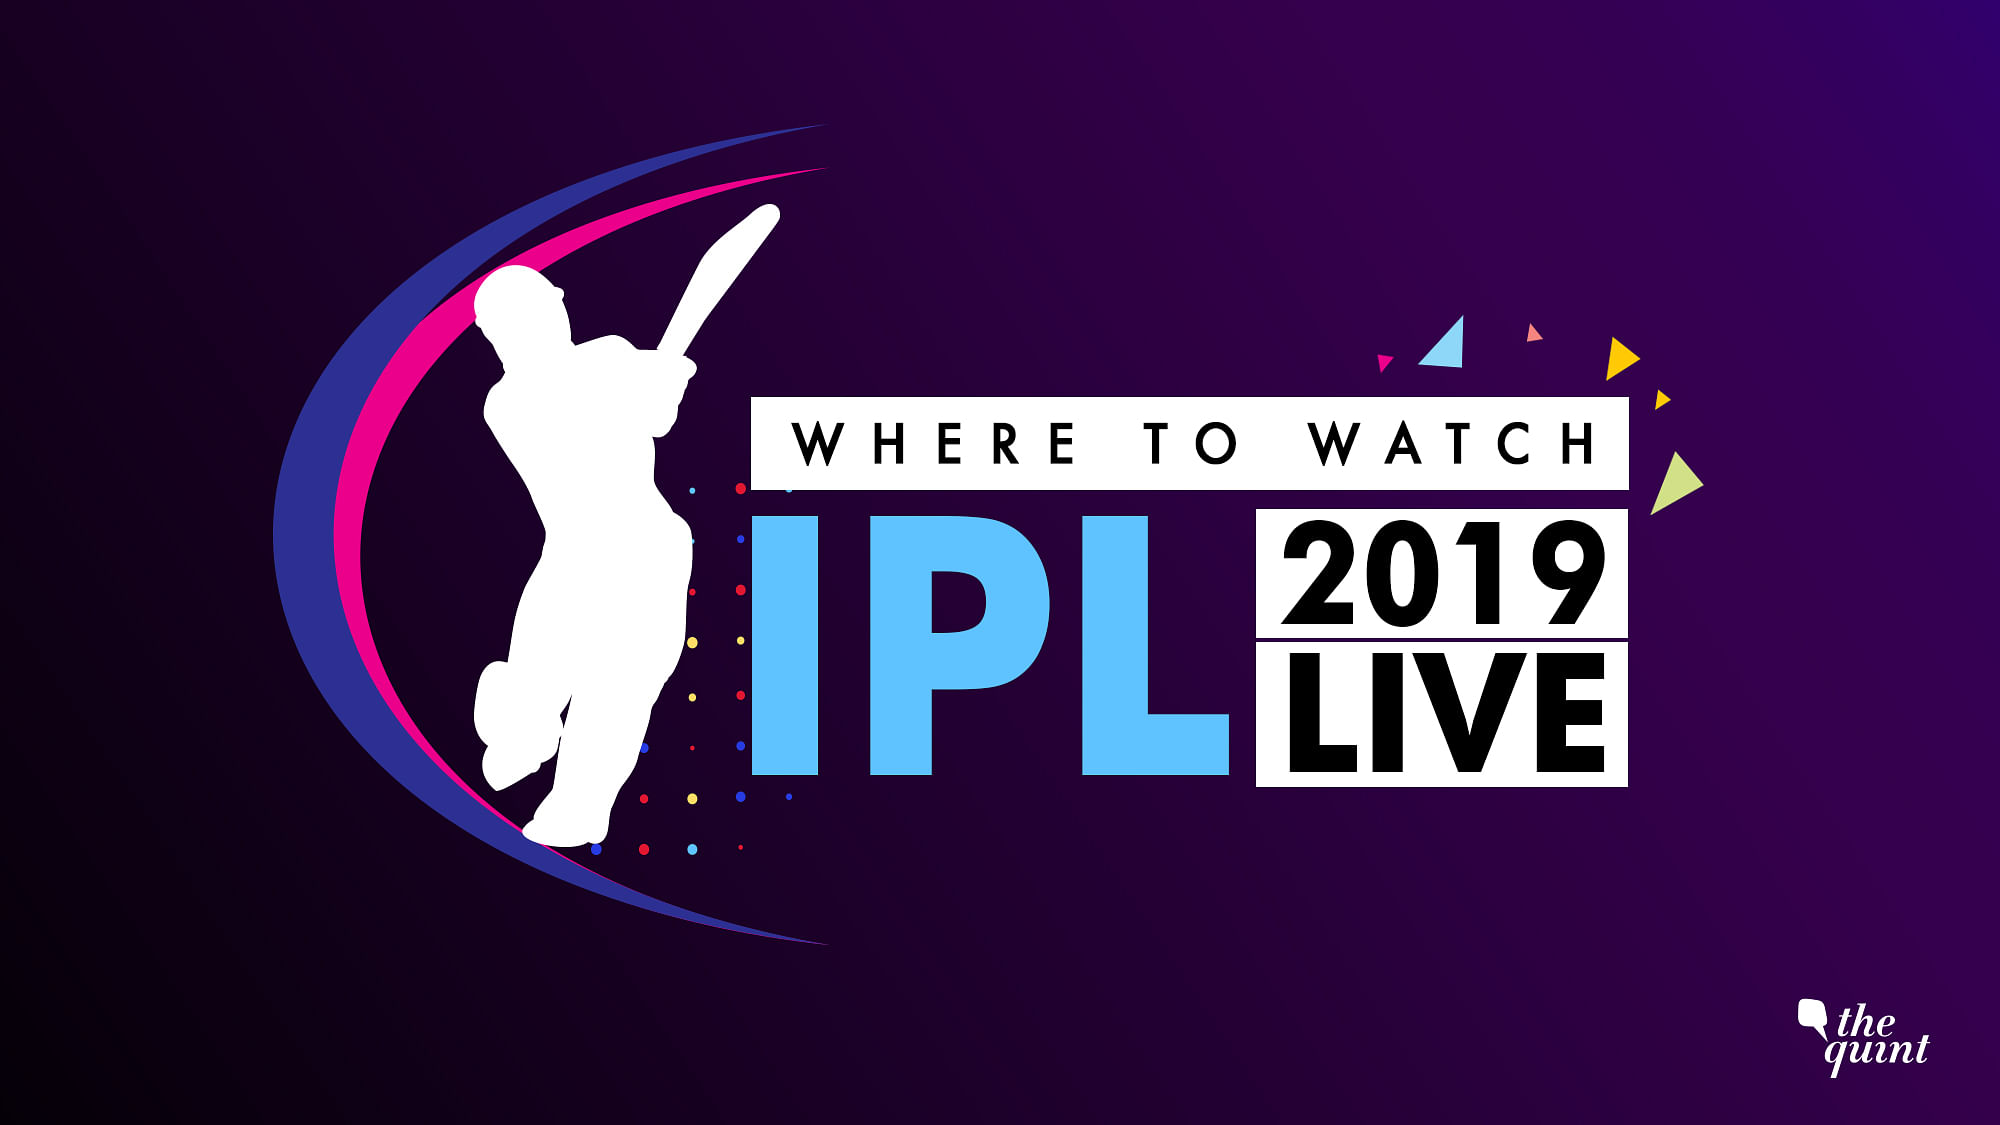  IPL 2019: Where to Watch Match Online and on TV, DC vs SRH